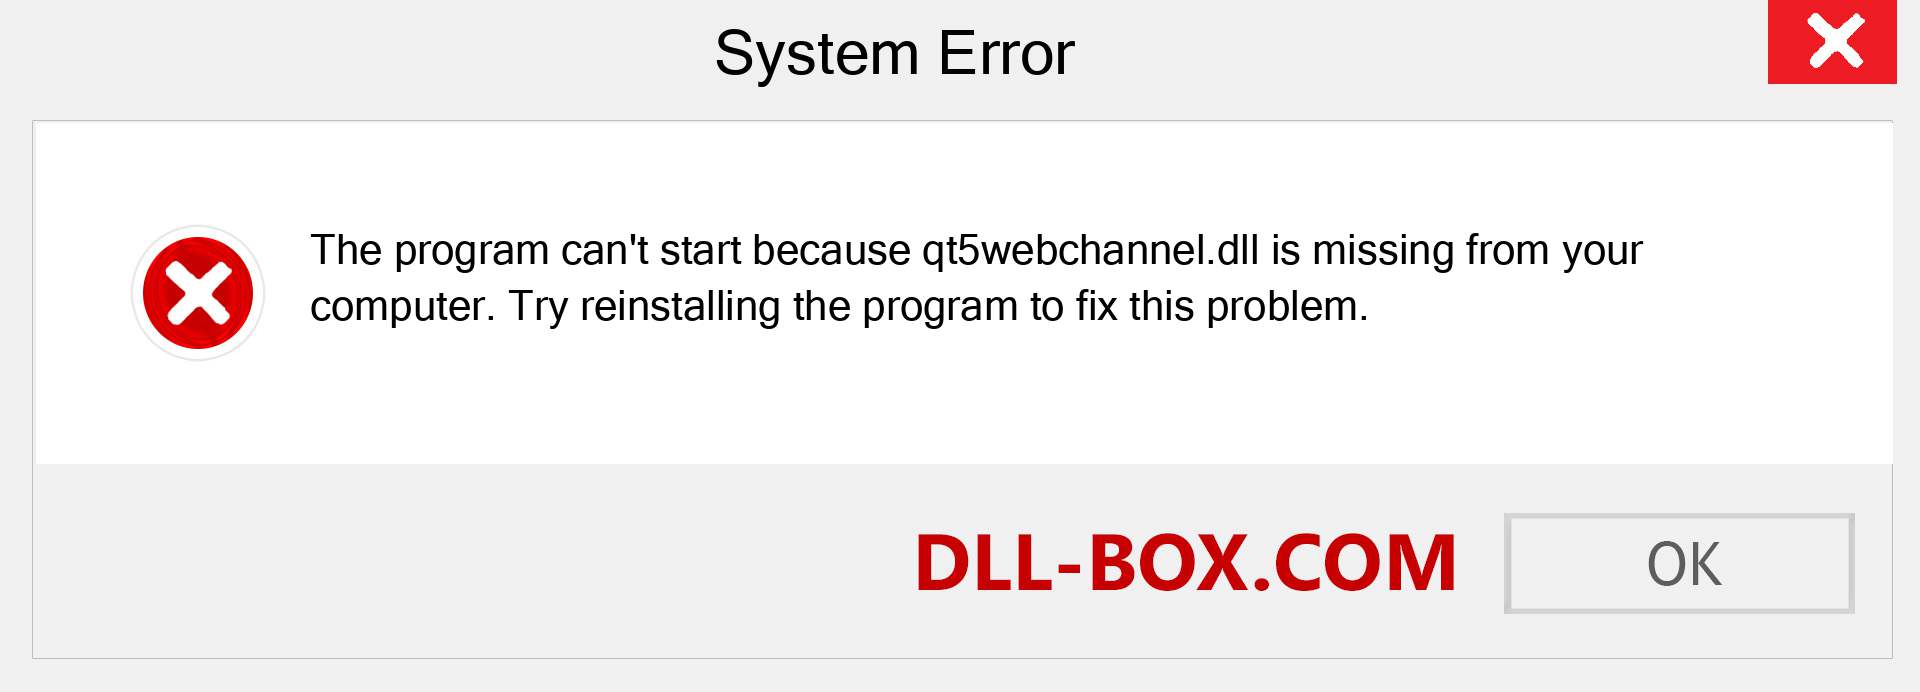  qt5webchannel.dll file is missing?. Download for Windows 7, 8, 10 - Fix  qt5webchannel dll Missing Error on Windows, photos, images